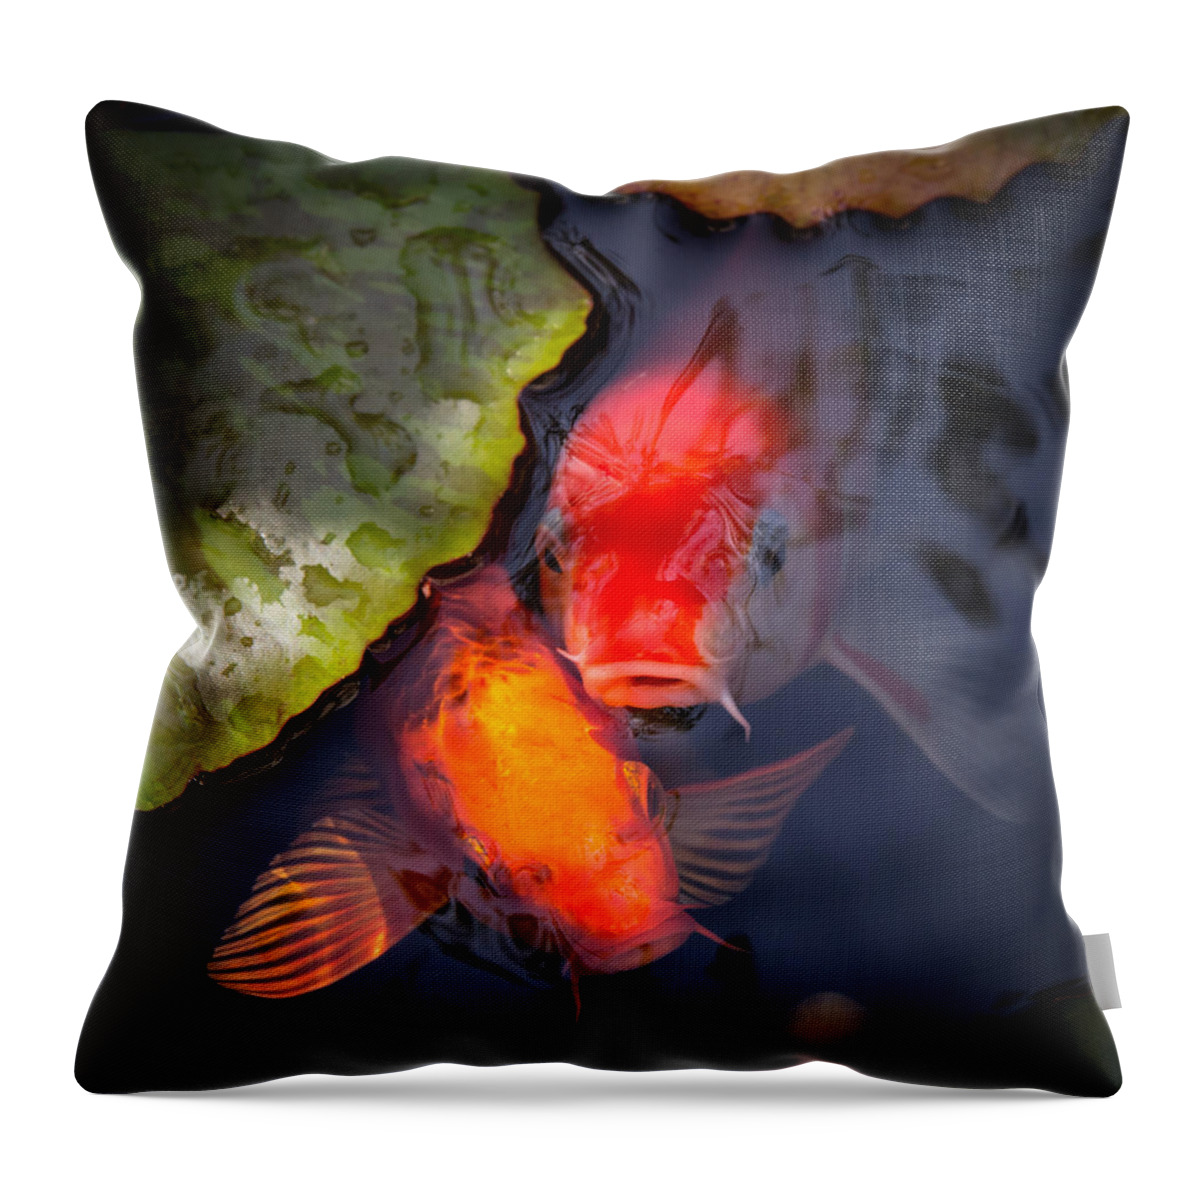 Koi Throw Pillow featuring the photograph Hopeful Faces by Priya Ghose